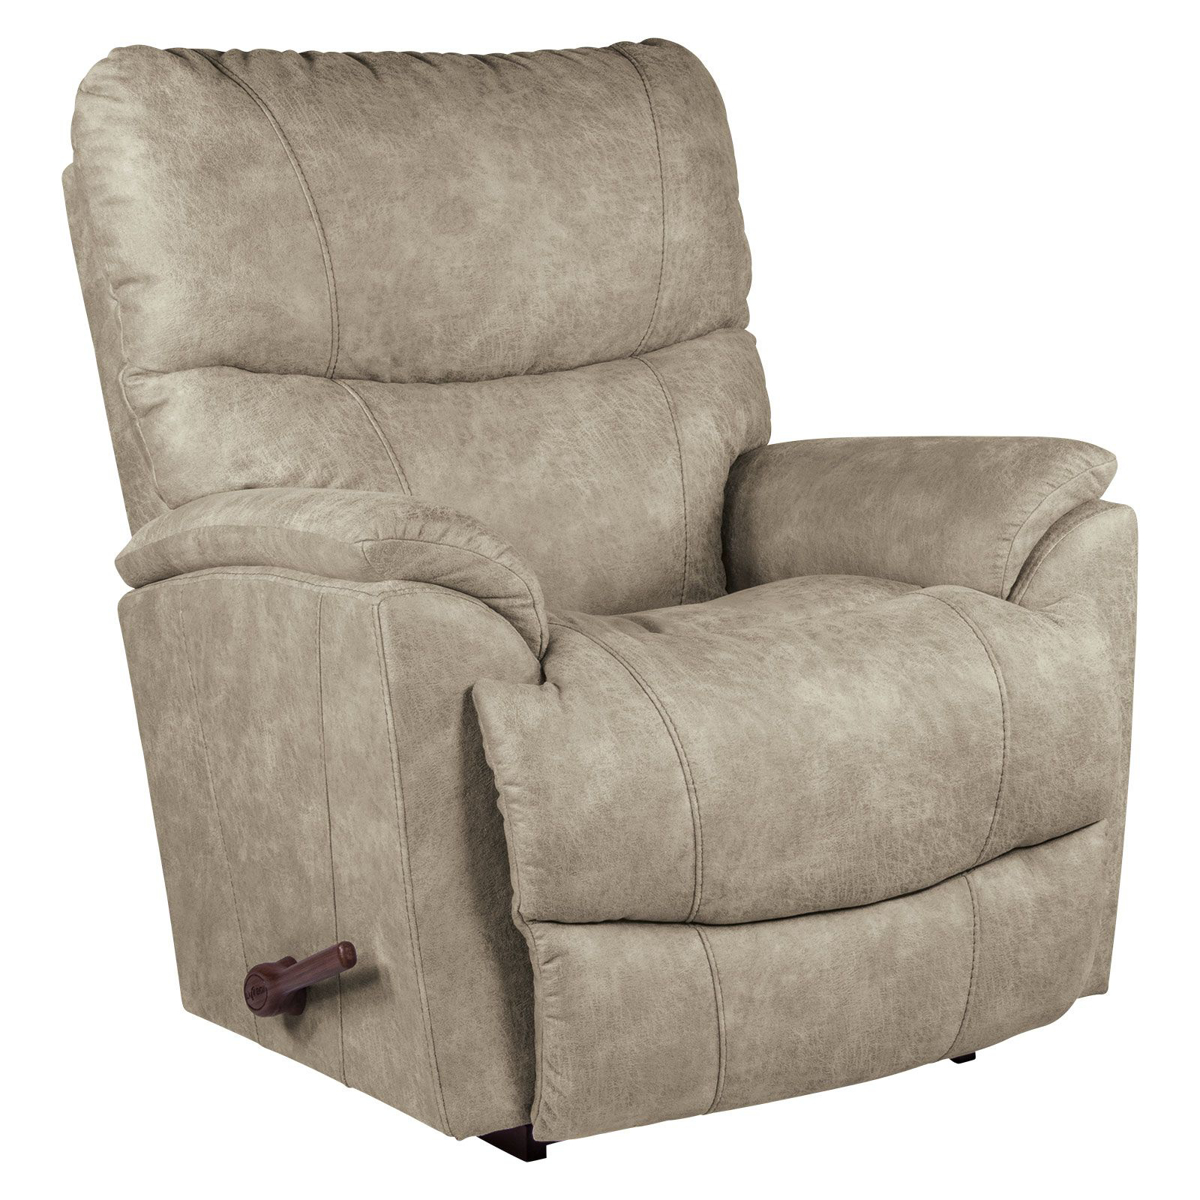 Picture of Trouper Stucco Recliner